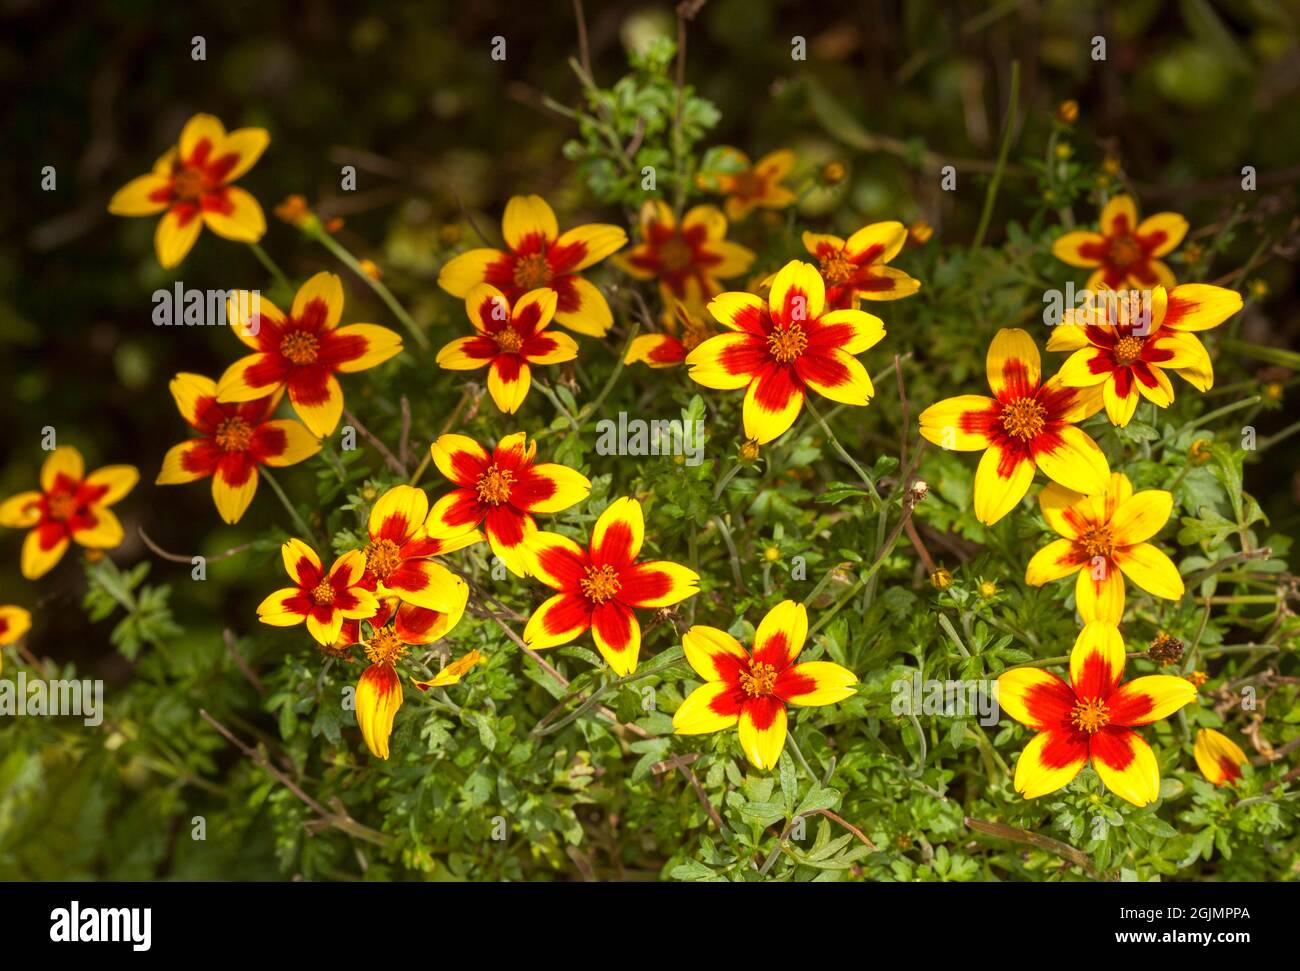 Vivid red and yellow flowers of Bidens ferulifolia 'Red Eye', Beggarticks, against background of emerald green foliage, in Australia Stock Photo